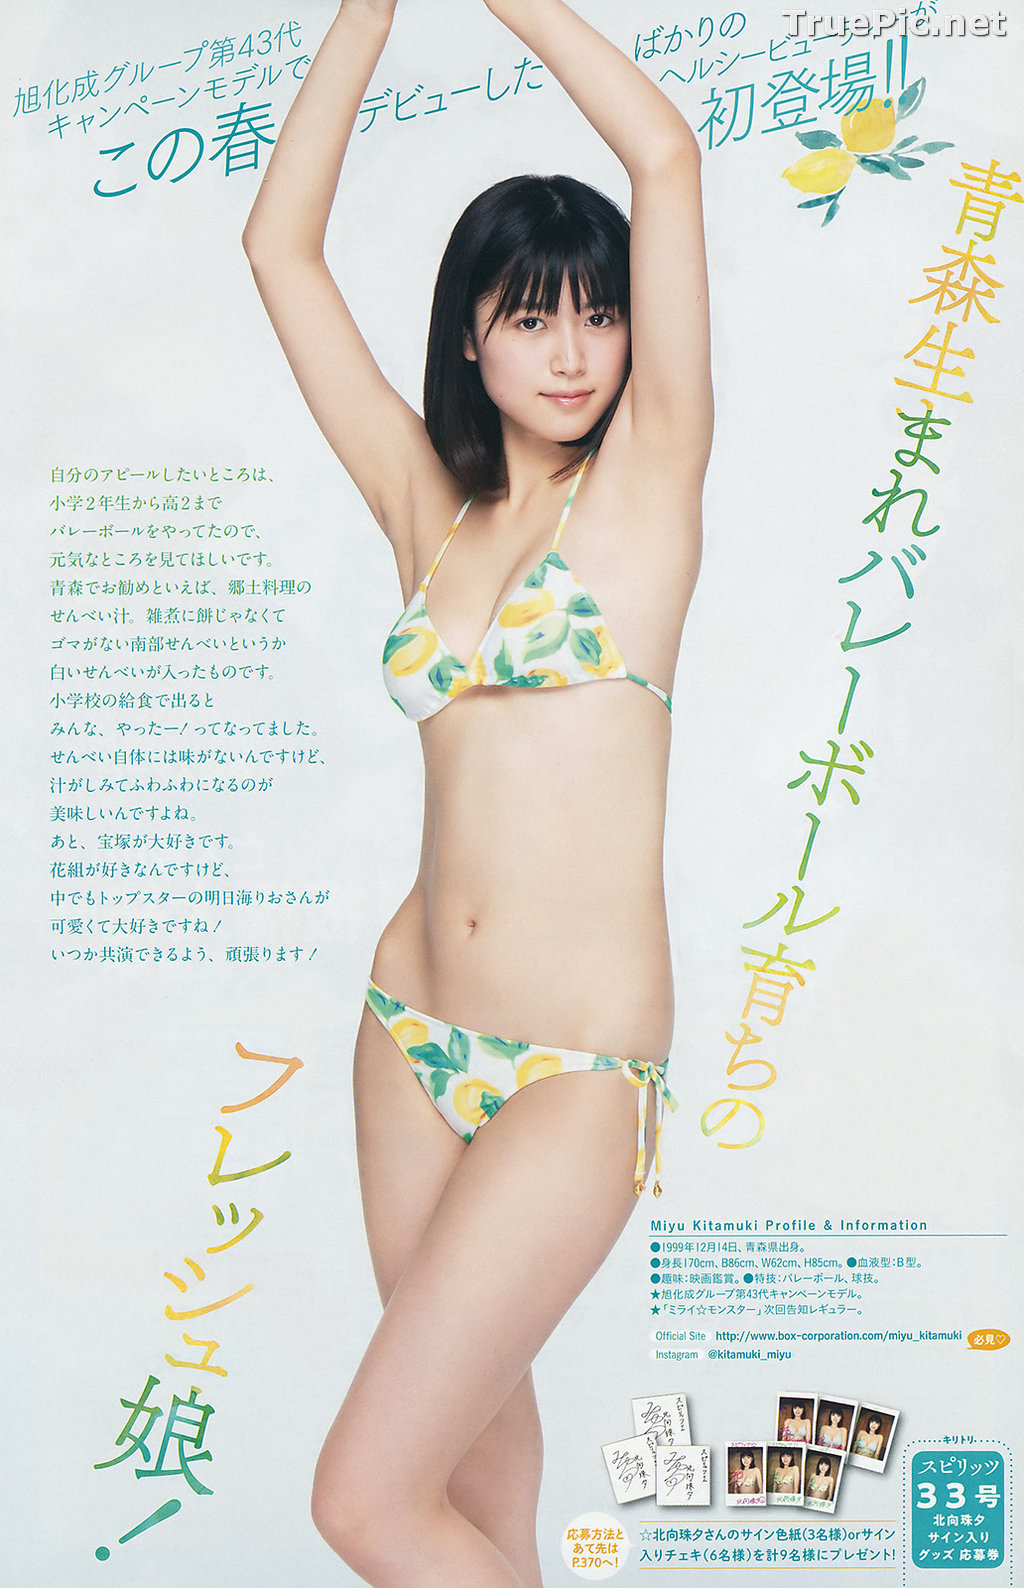 ImageJapanese Gravure Idol and Actress - Kitamuki Miyu (北向珠夕) - Sexy Picture Collection 2020 - TruePic.net - Picture-152